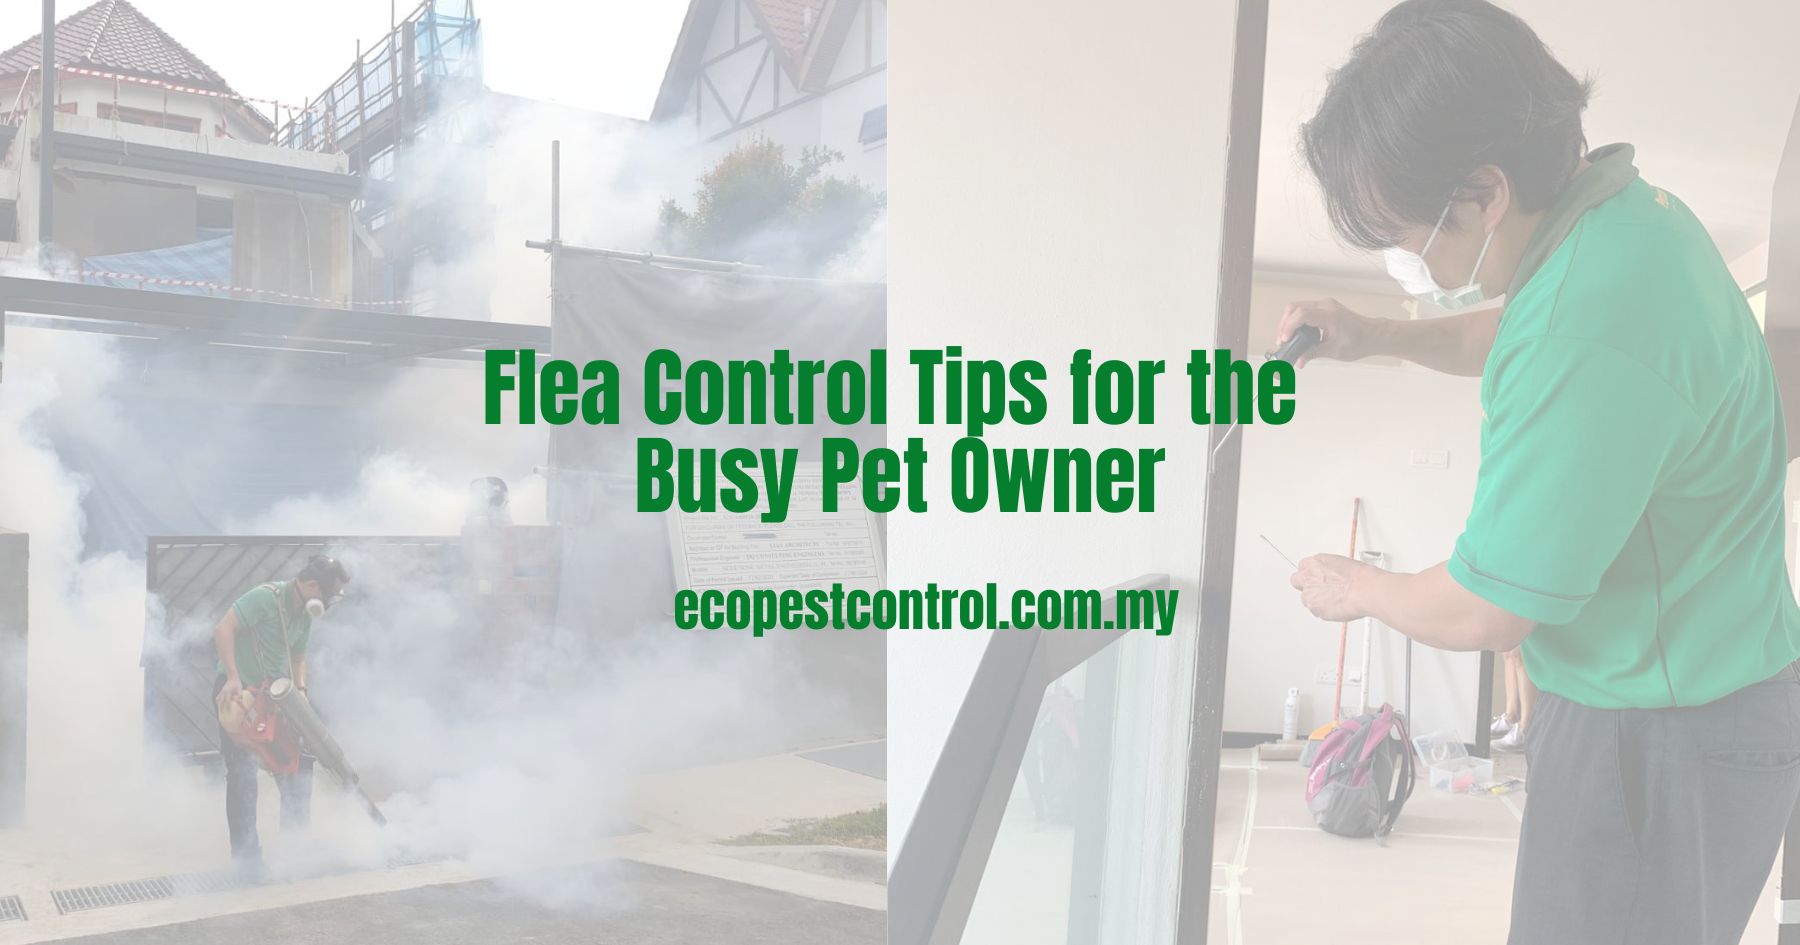 Flea Control Tips for the Busy Pet Owner